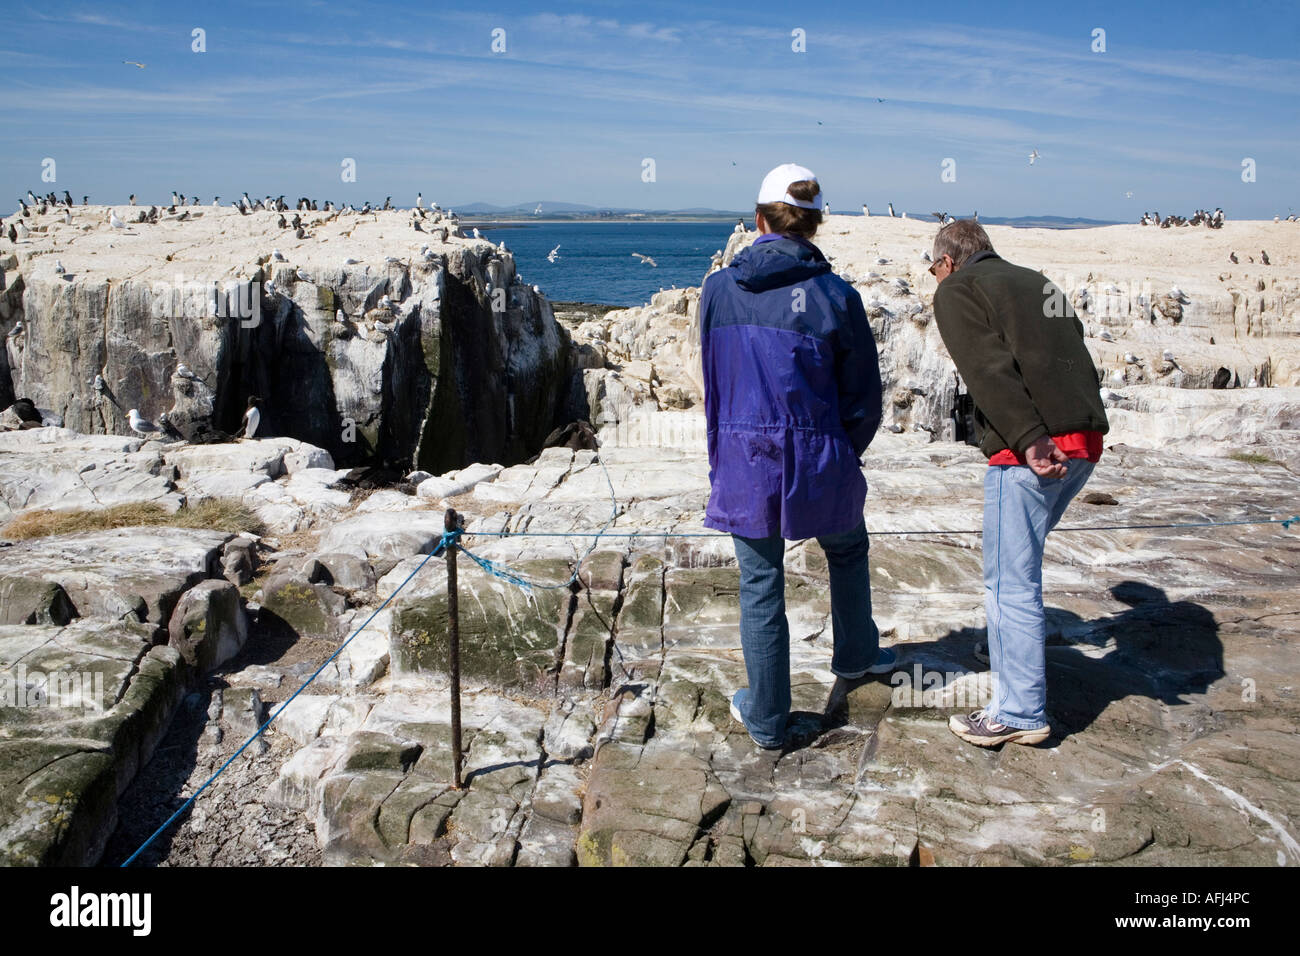 Tourists view the nesting birds in colonies on Staple Island, the farnes off Northumberland Coast, England Stock Photo